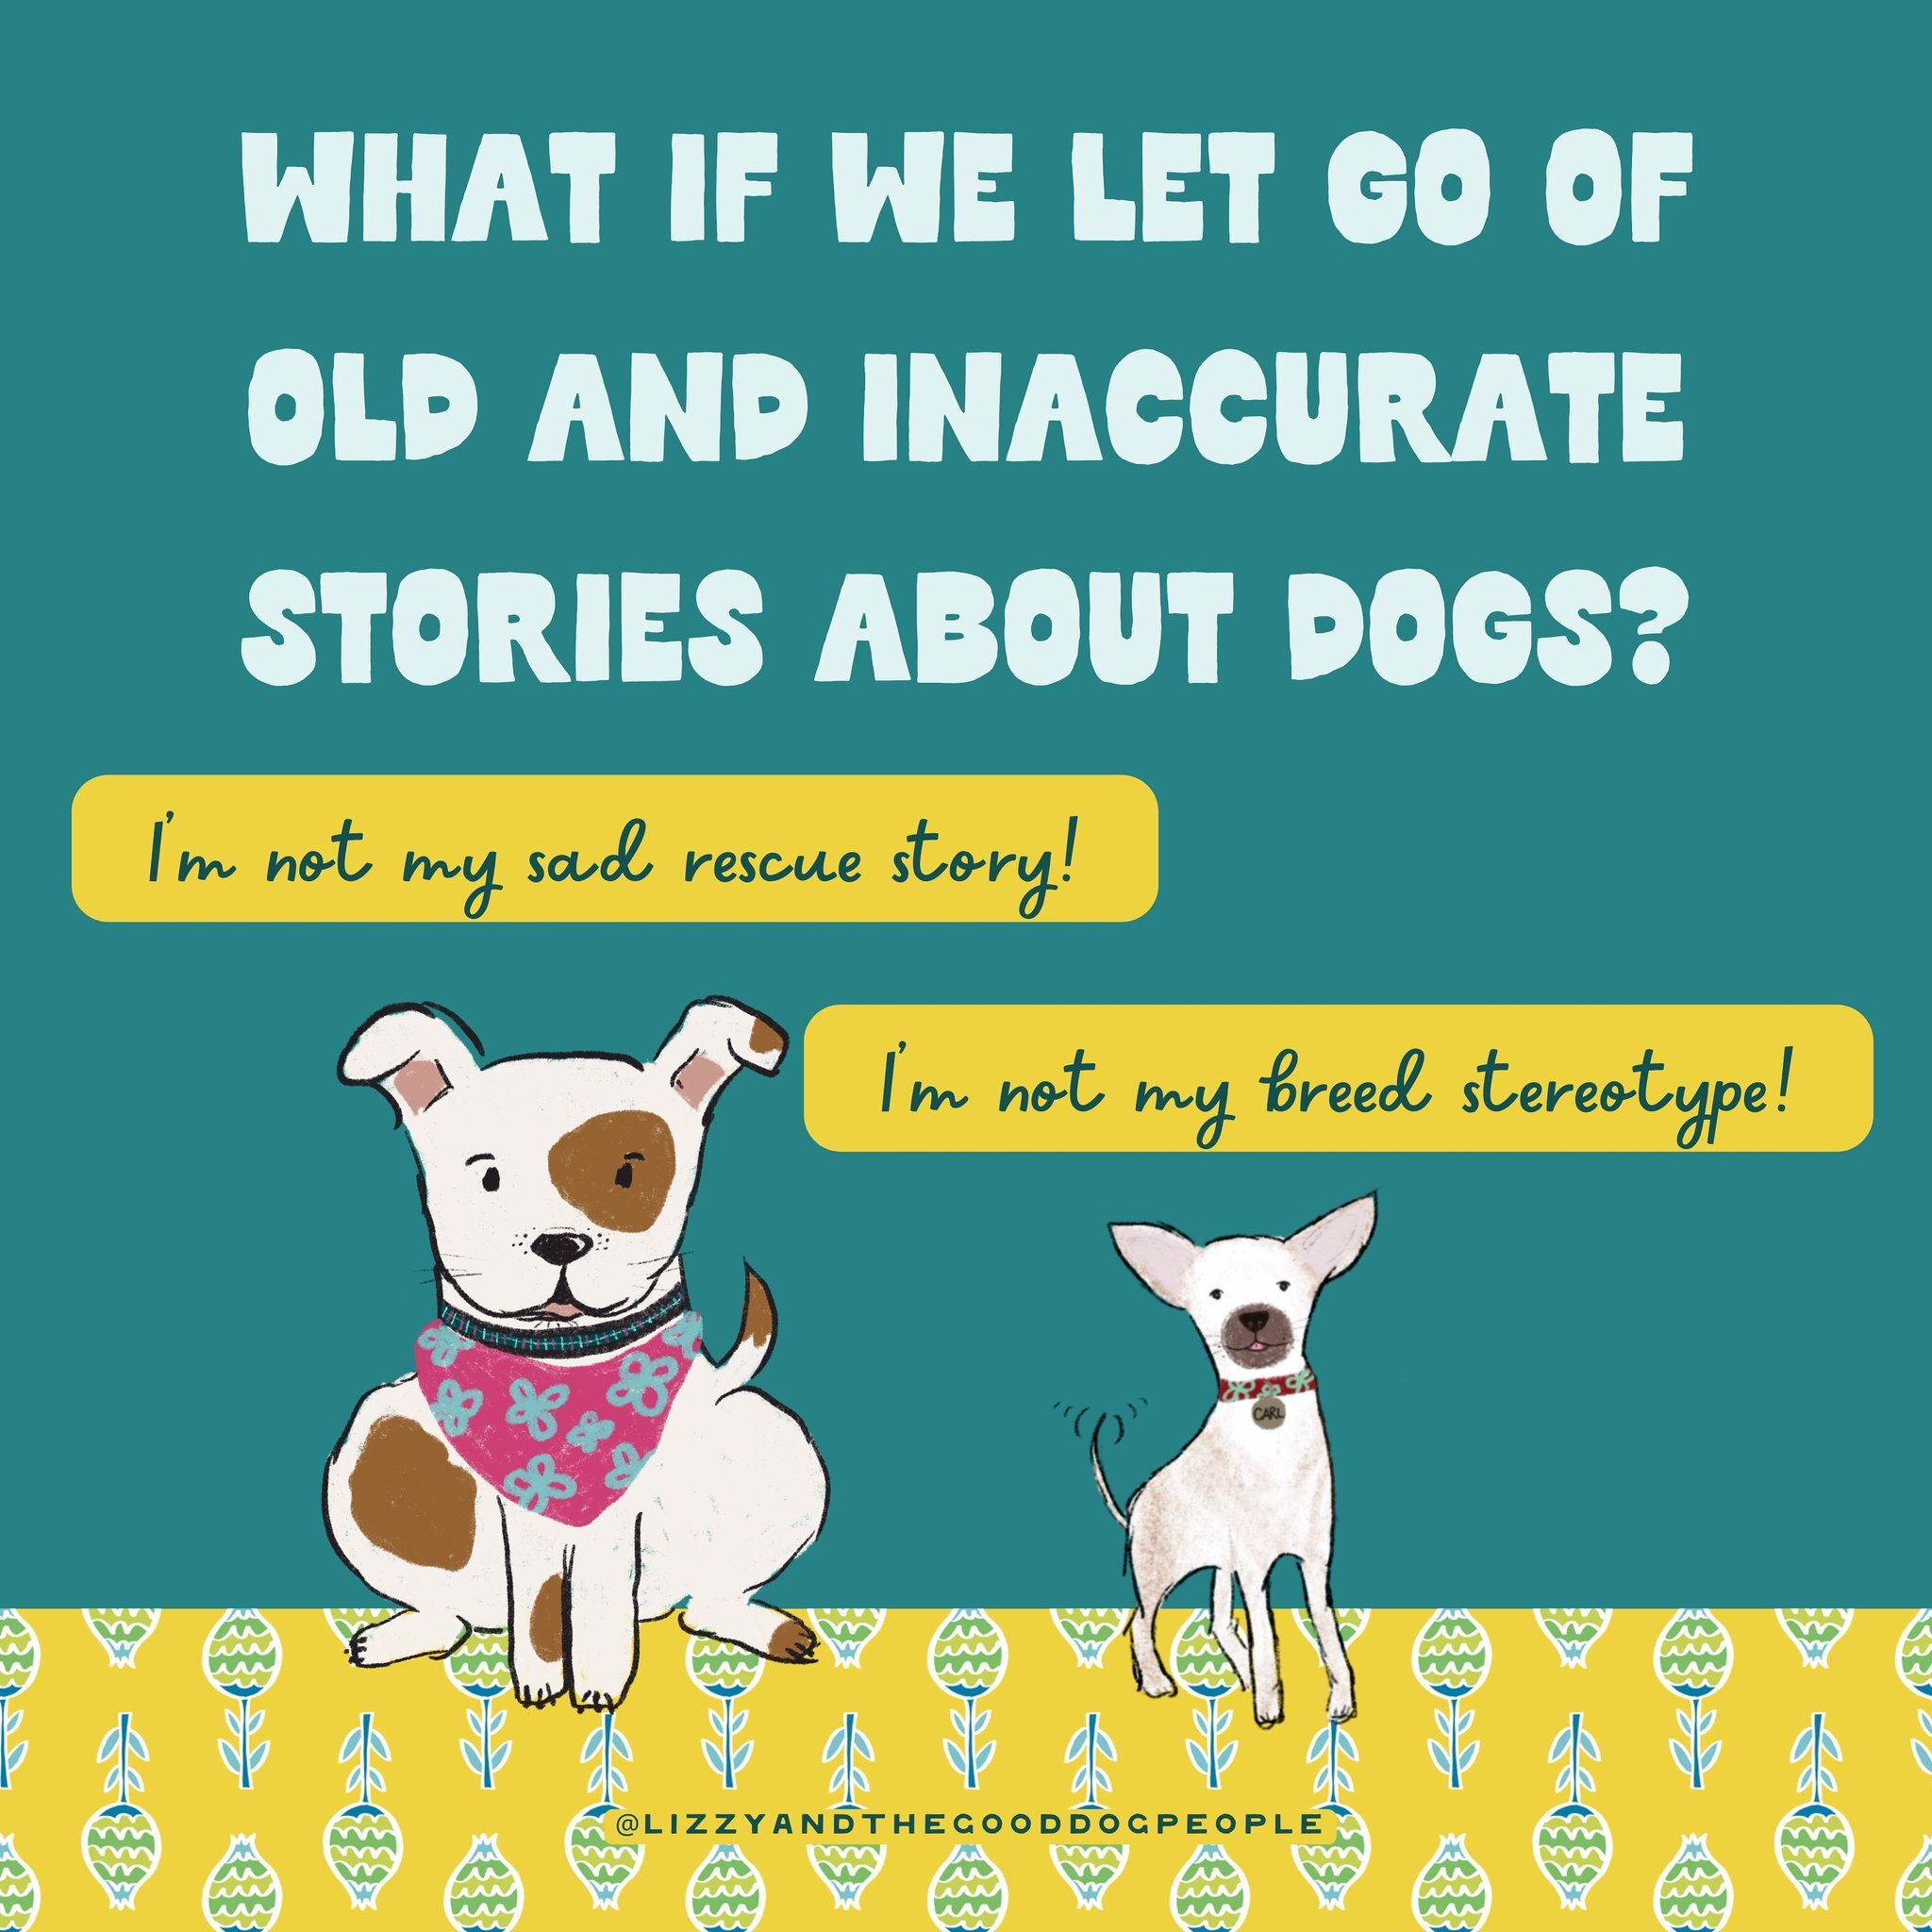 As we journey through life with our dogs, we attach stories to them based on past experiences and preconceived notions. These stories can shape our perceptions and interactions with dogs and often hinder our relationships with them.

Humans are natur